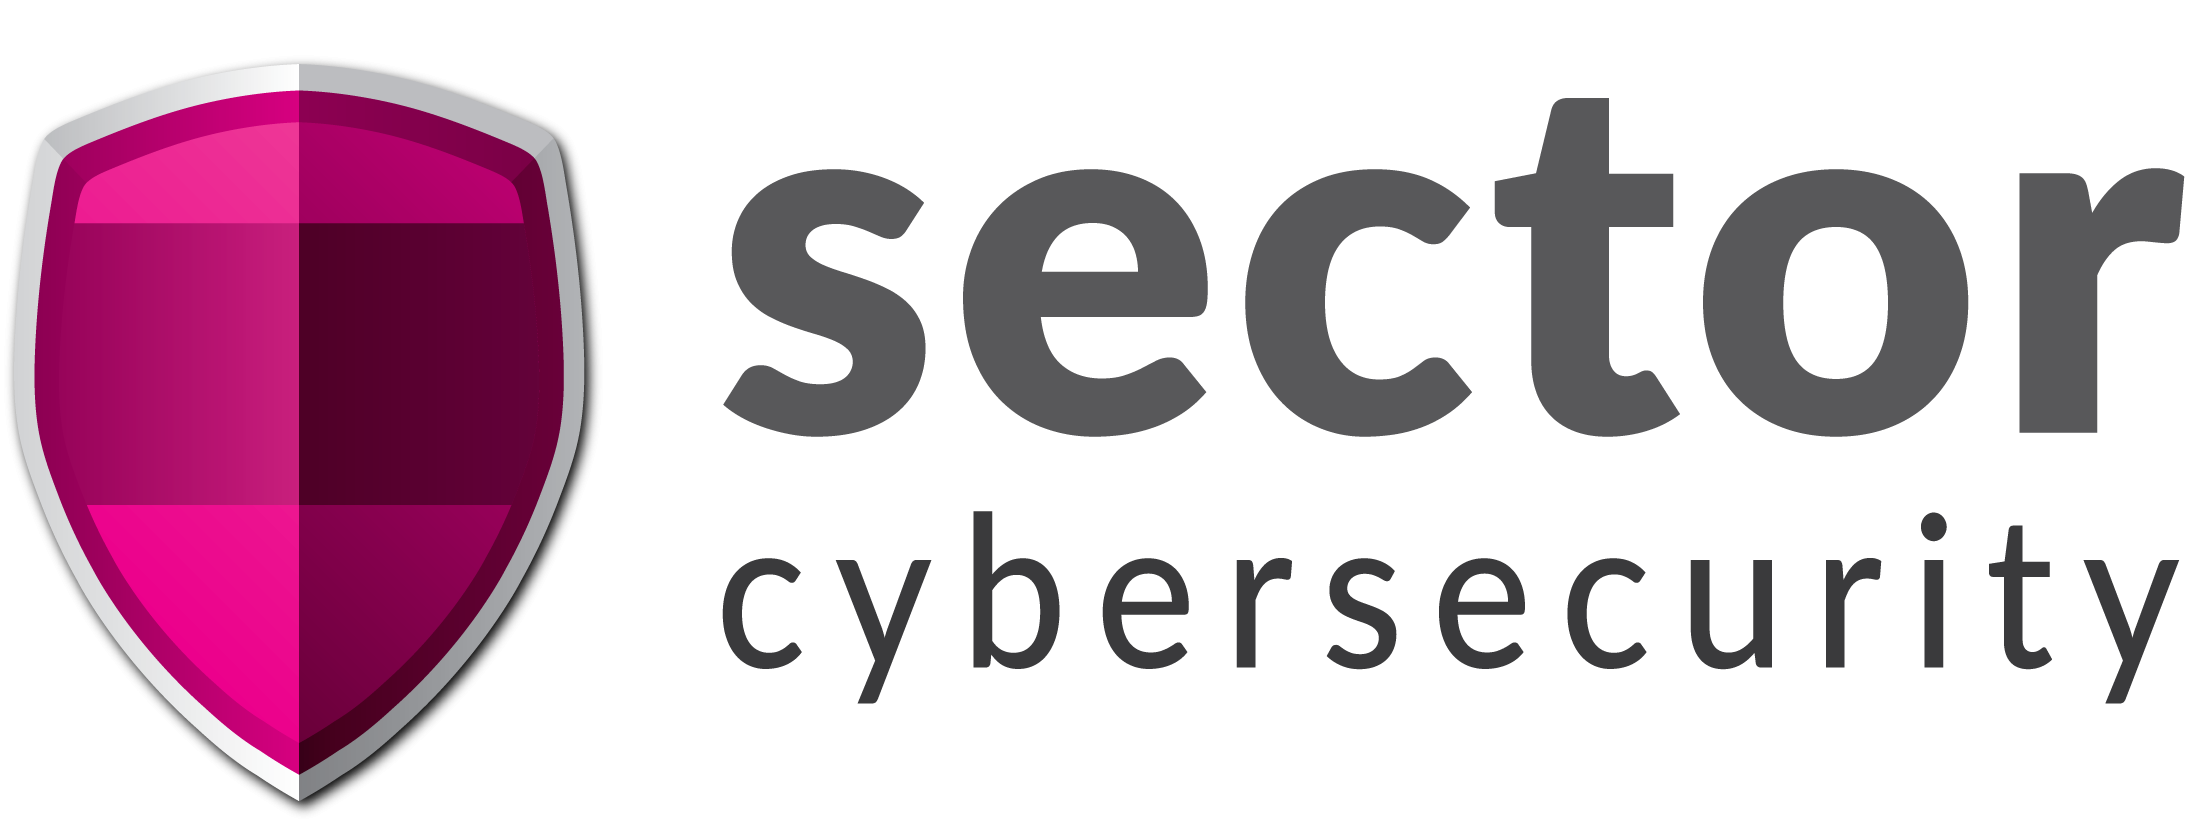 Sector CyberSecurity